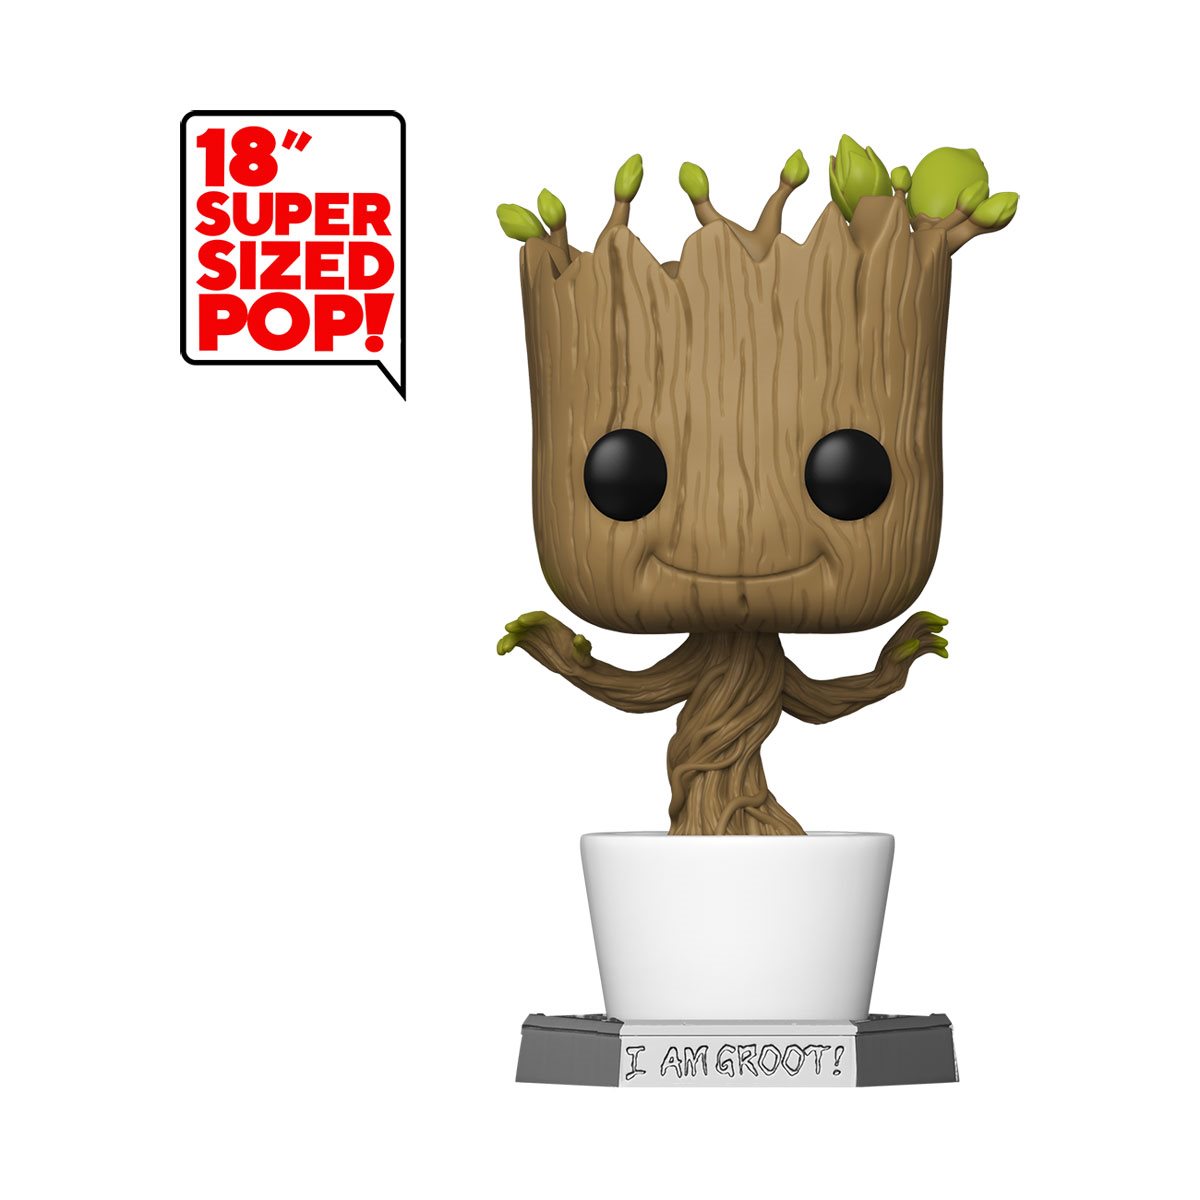 Baby Groot, Marvel comics, l am groot, guardians of the galaxy - I